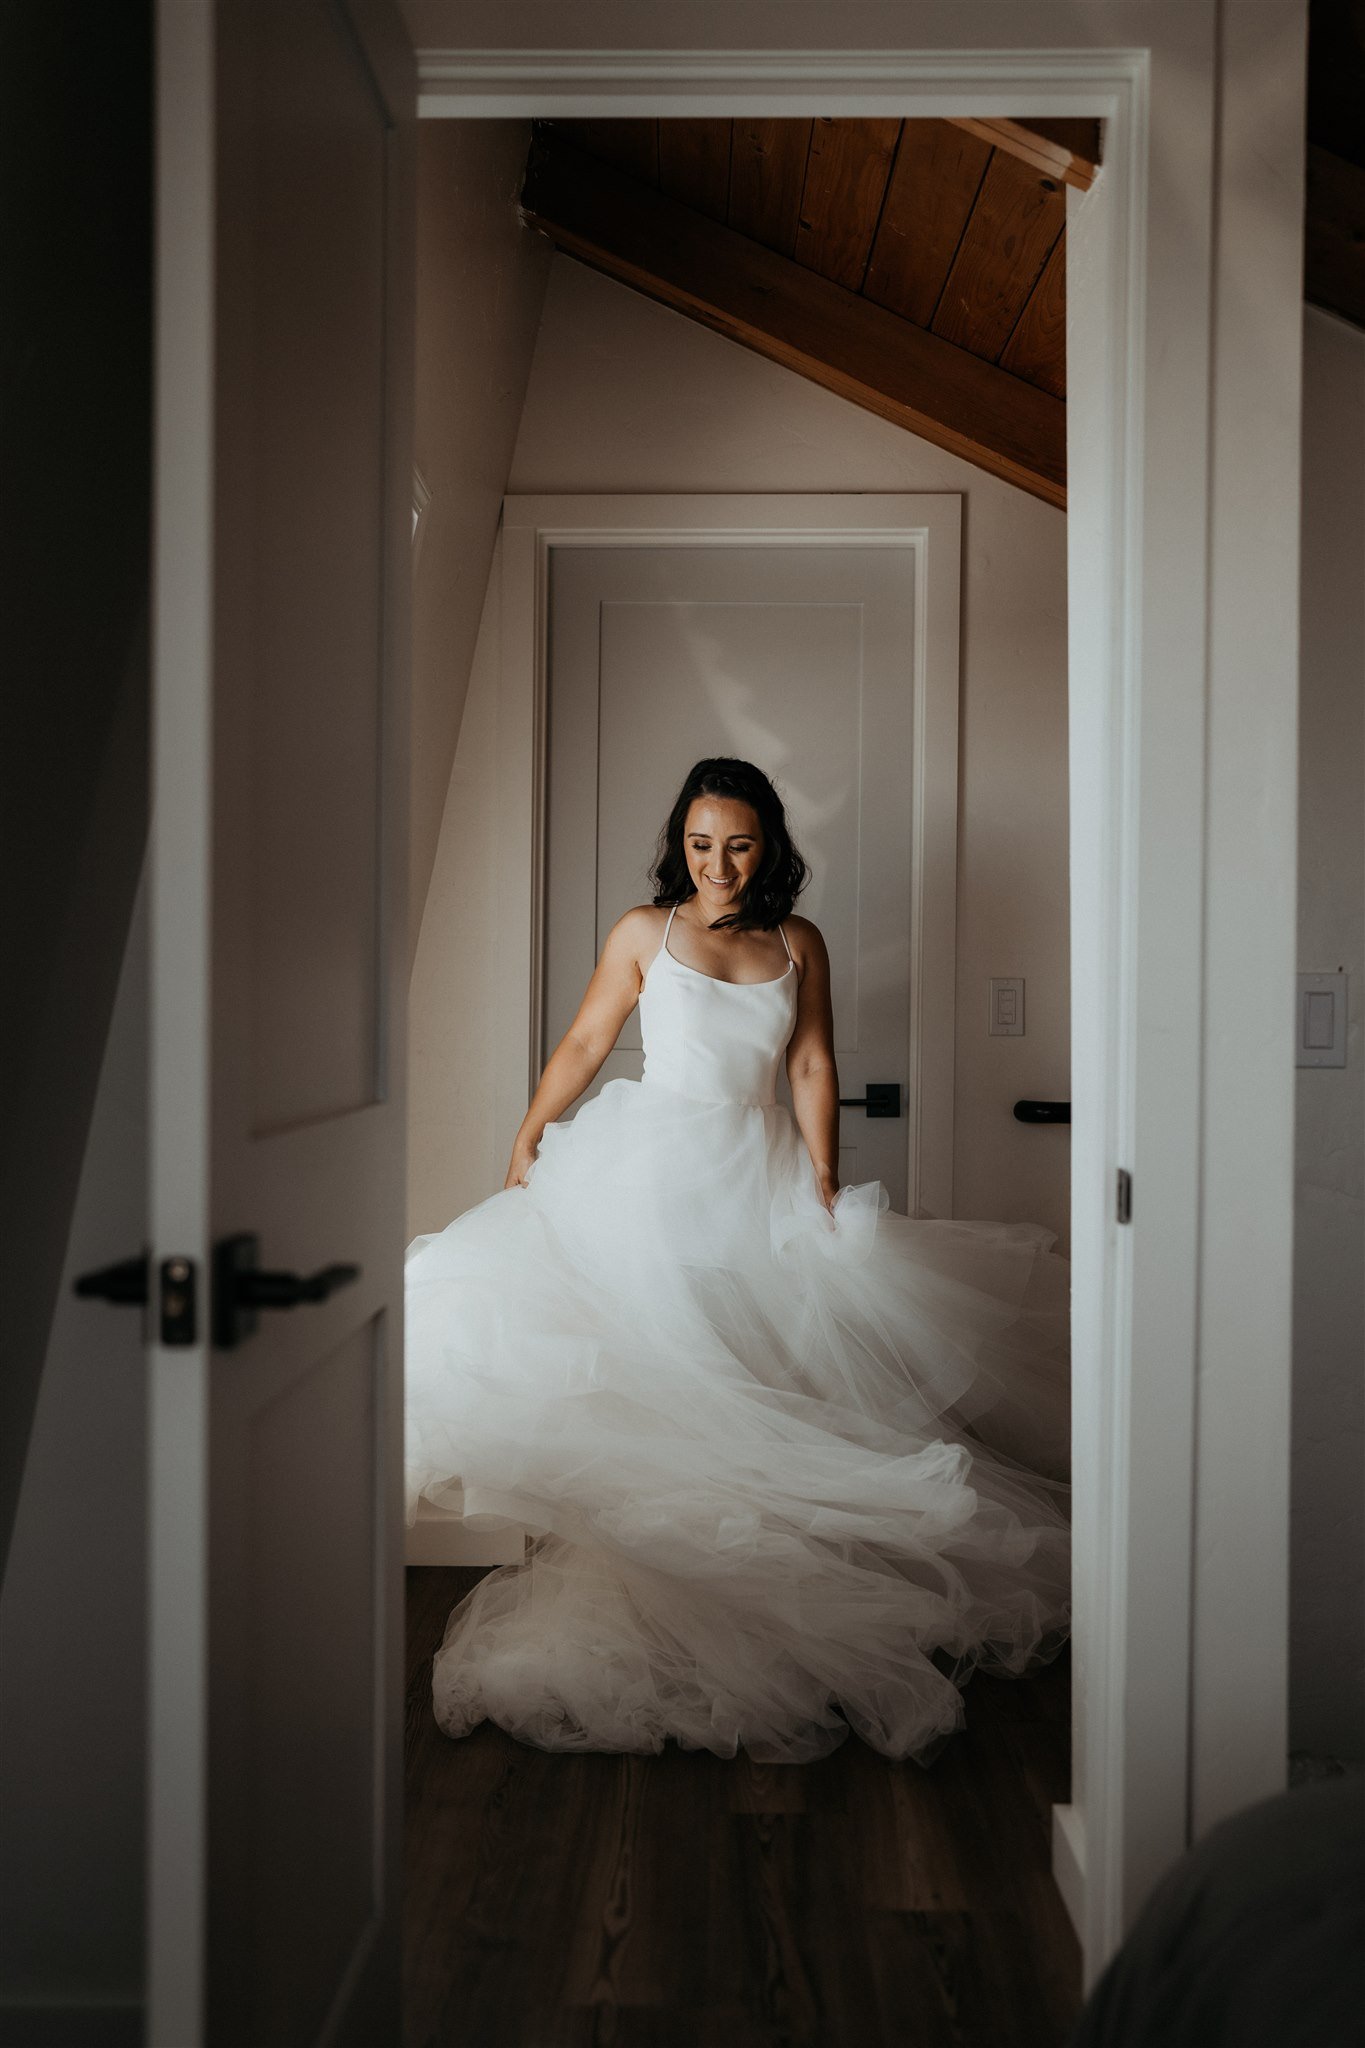 Bride wearing wedding dress and twirling